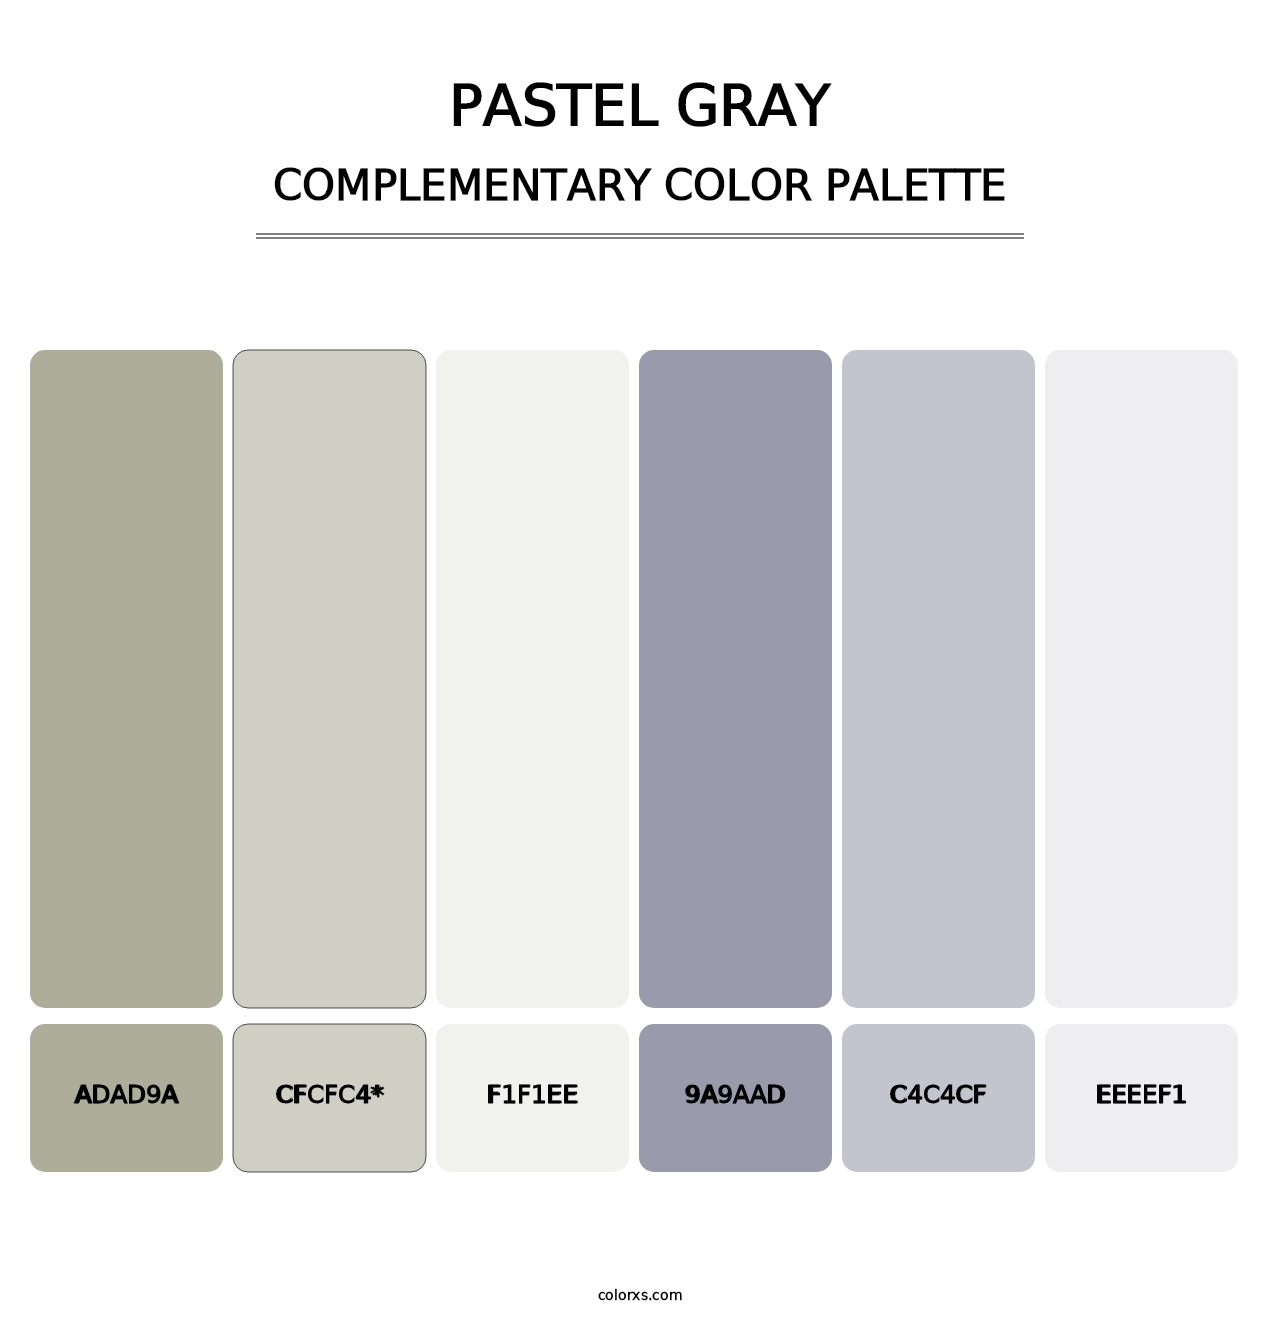 Pastel Gray - Complementary Color Palette